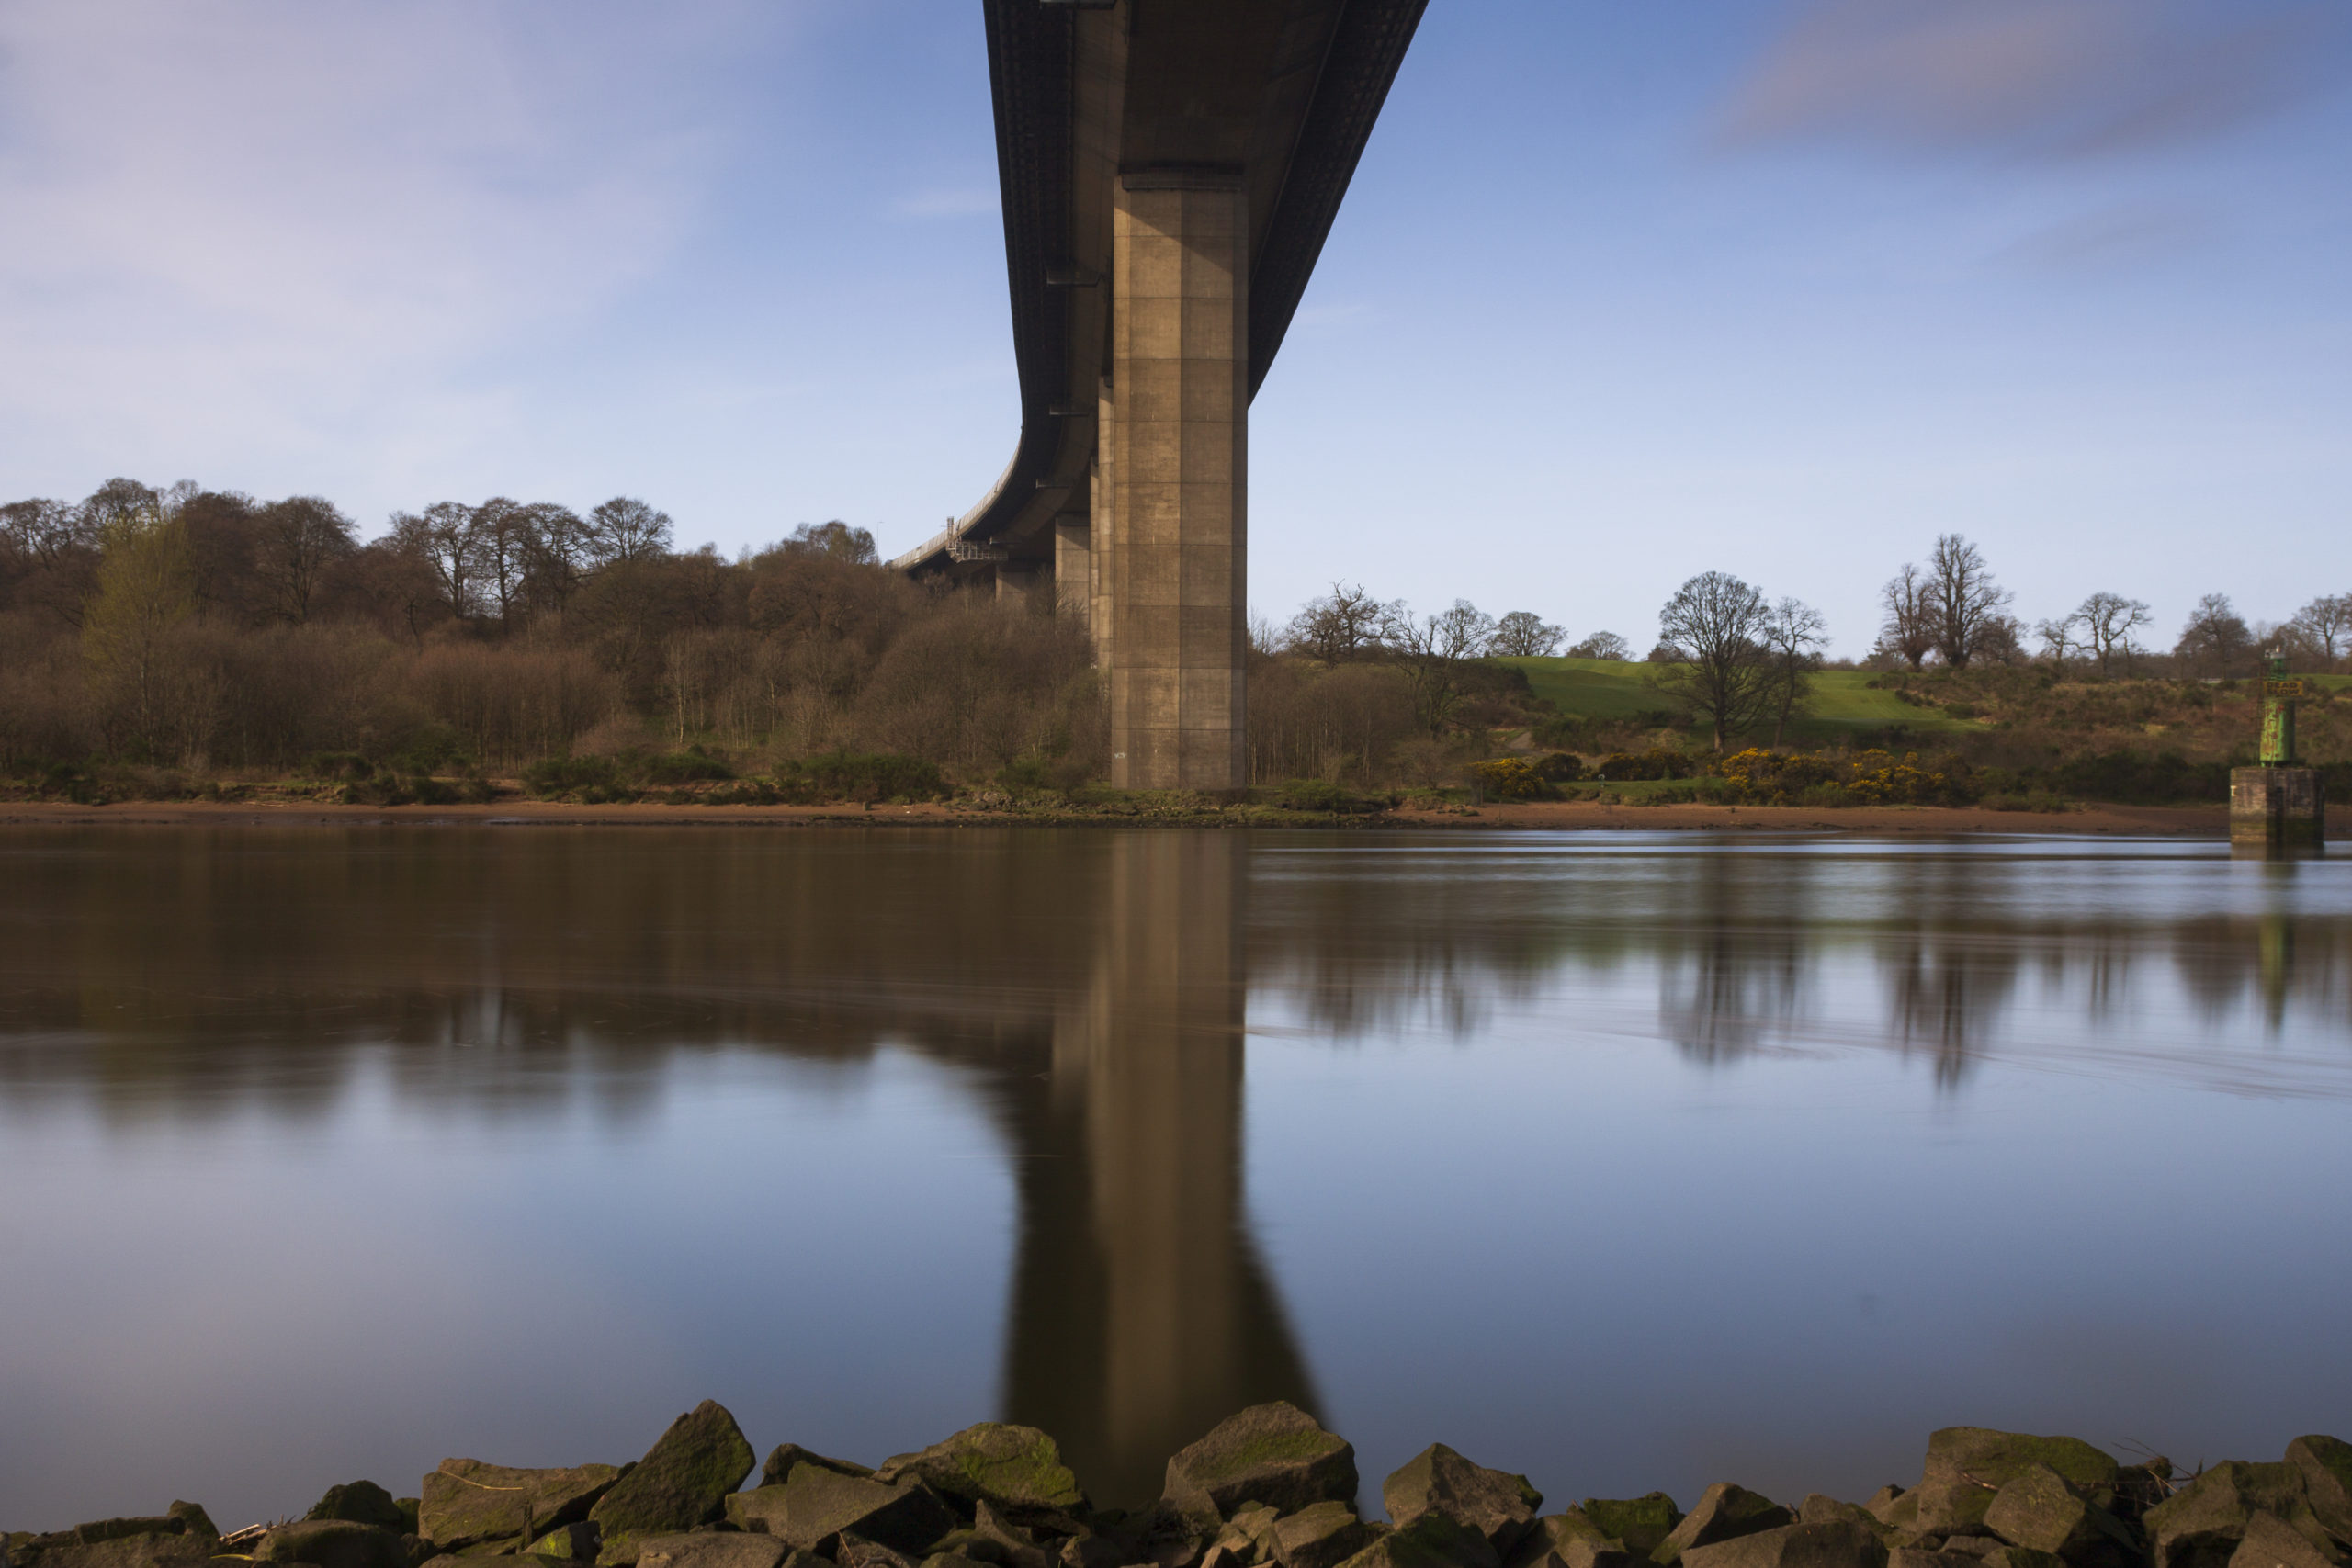 A multi span cable-stayed box girder bridge CaSE civil and structural engineering project erskine bridge